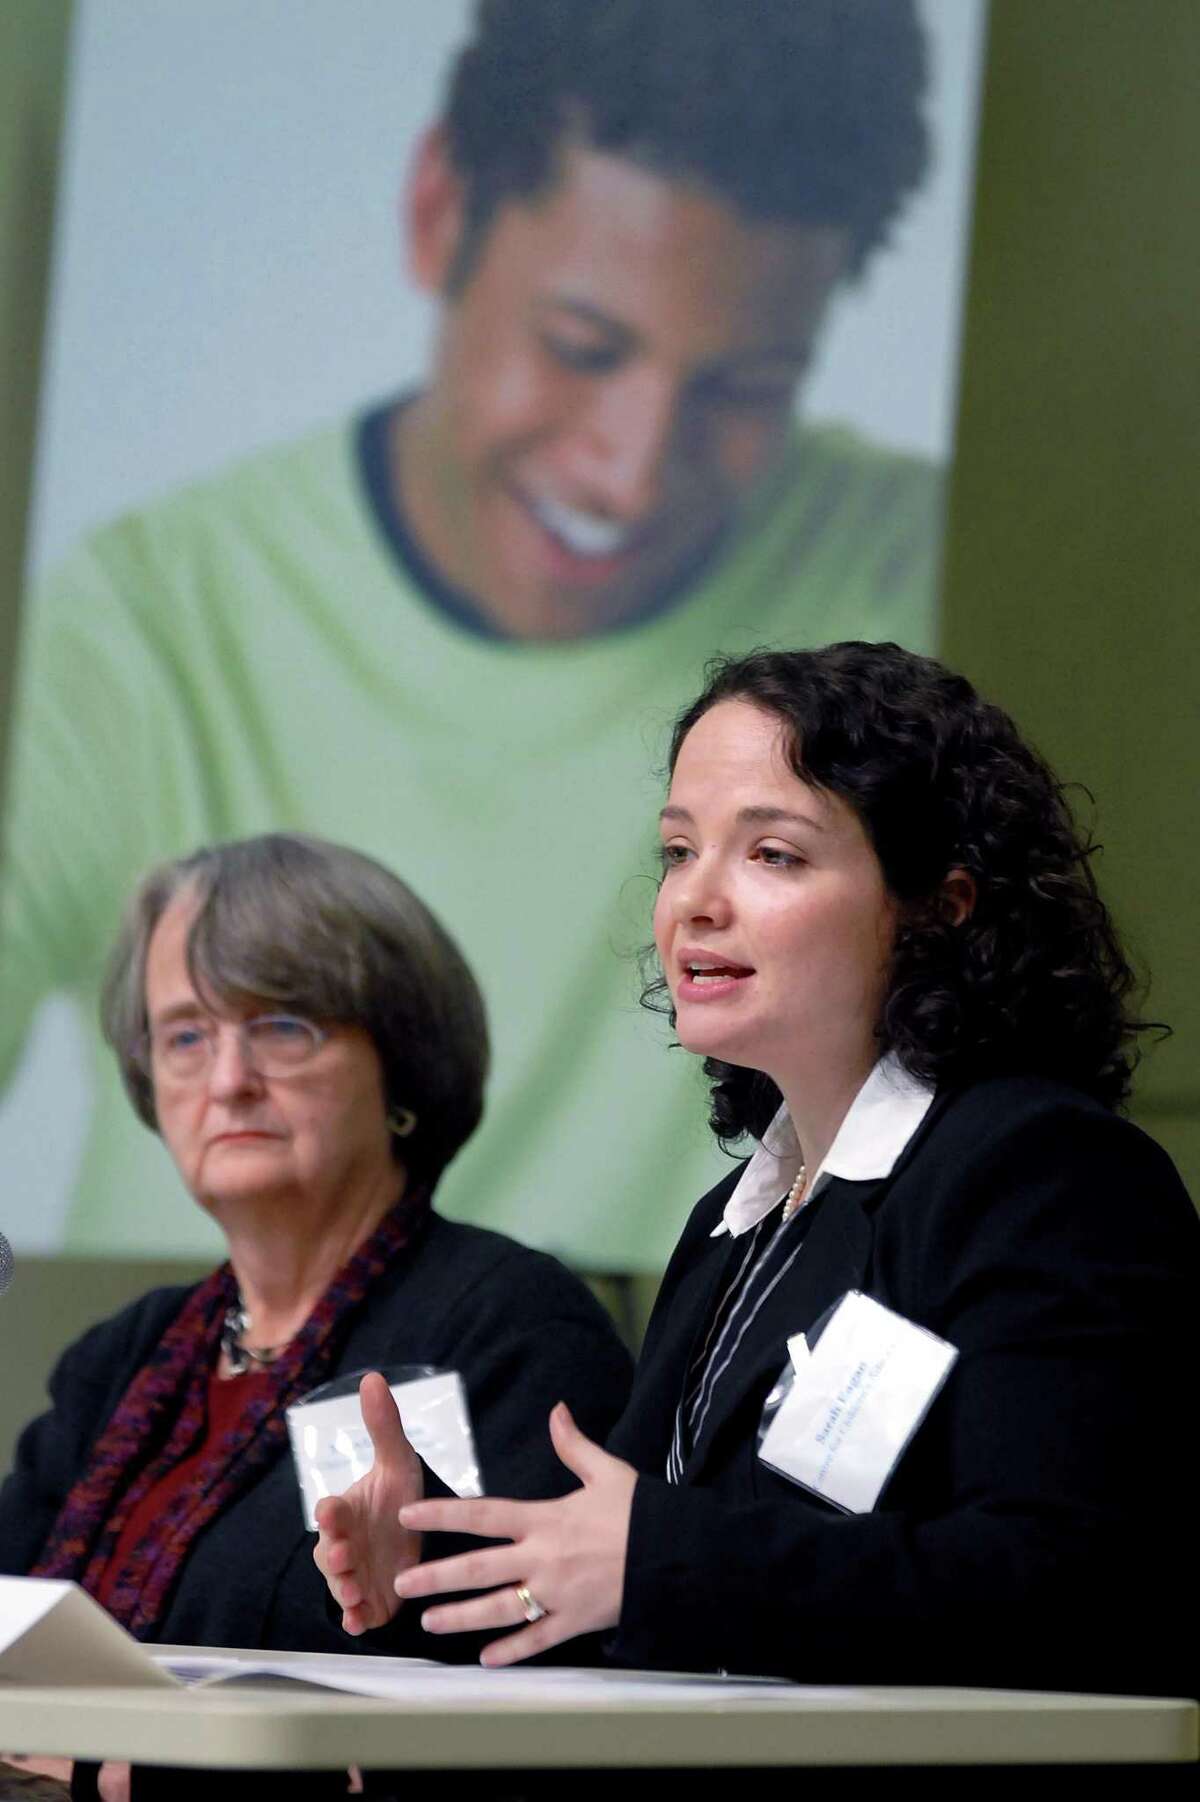 State Child Advocate Sarah Eagan, right, in a file photo.